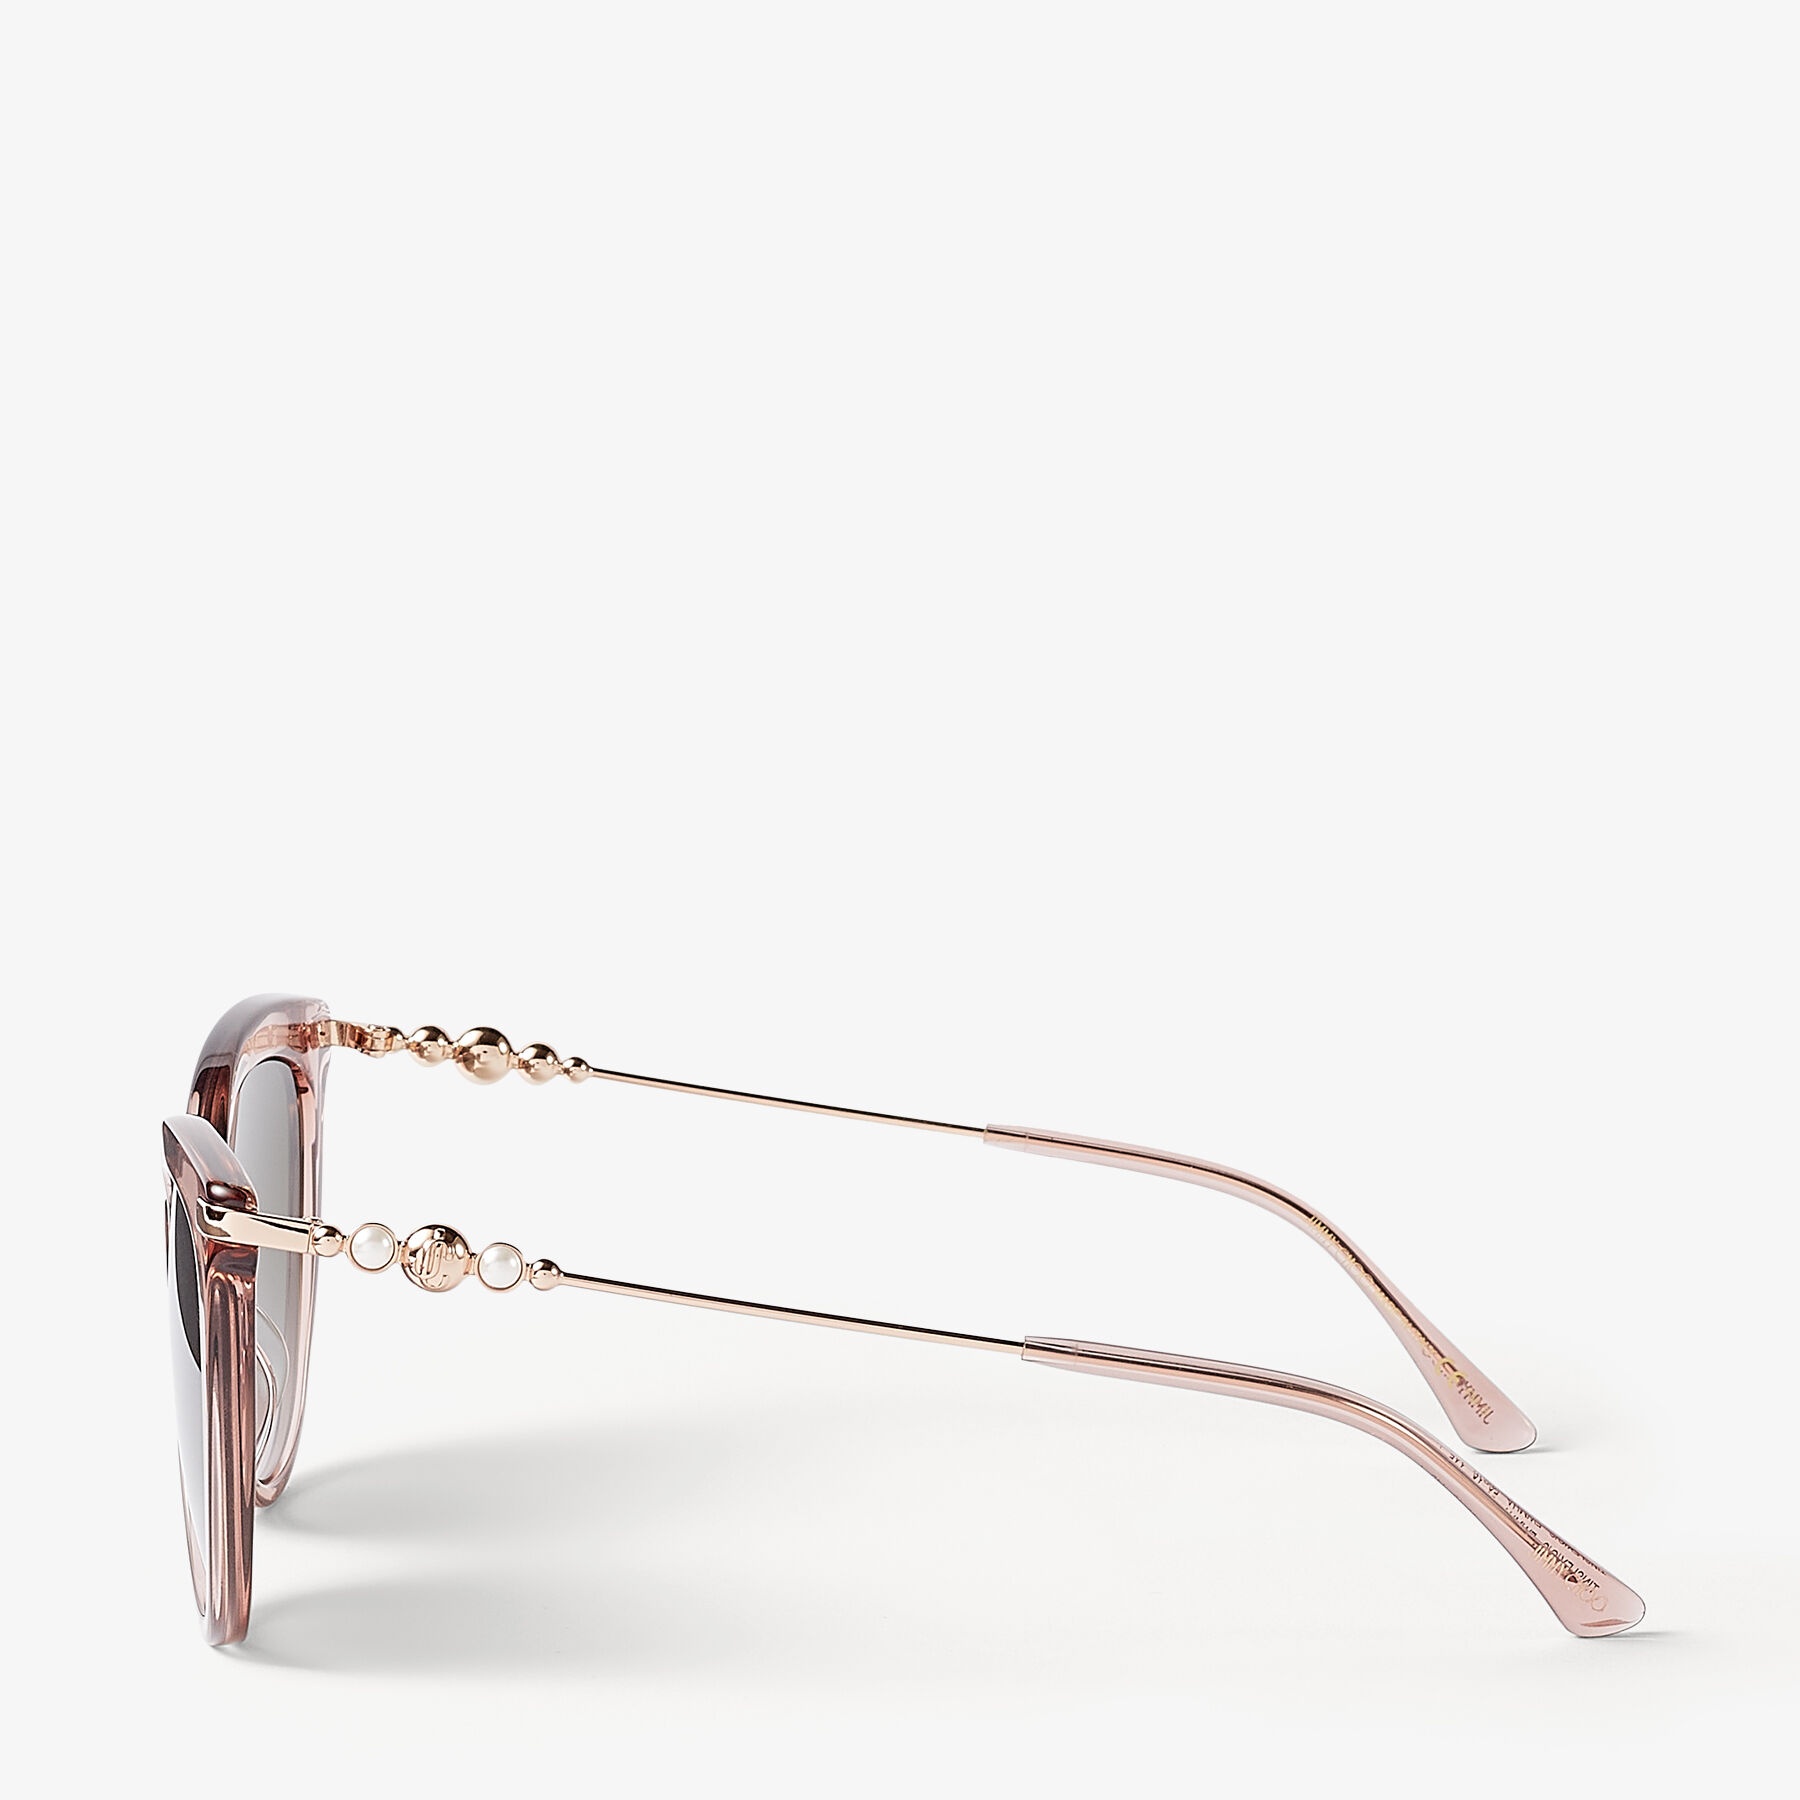 Tinsley/g/s 56
Nude and Copper Gold Cat Eye Sunglasses with Pearls - 2